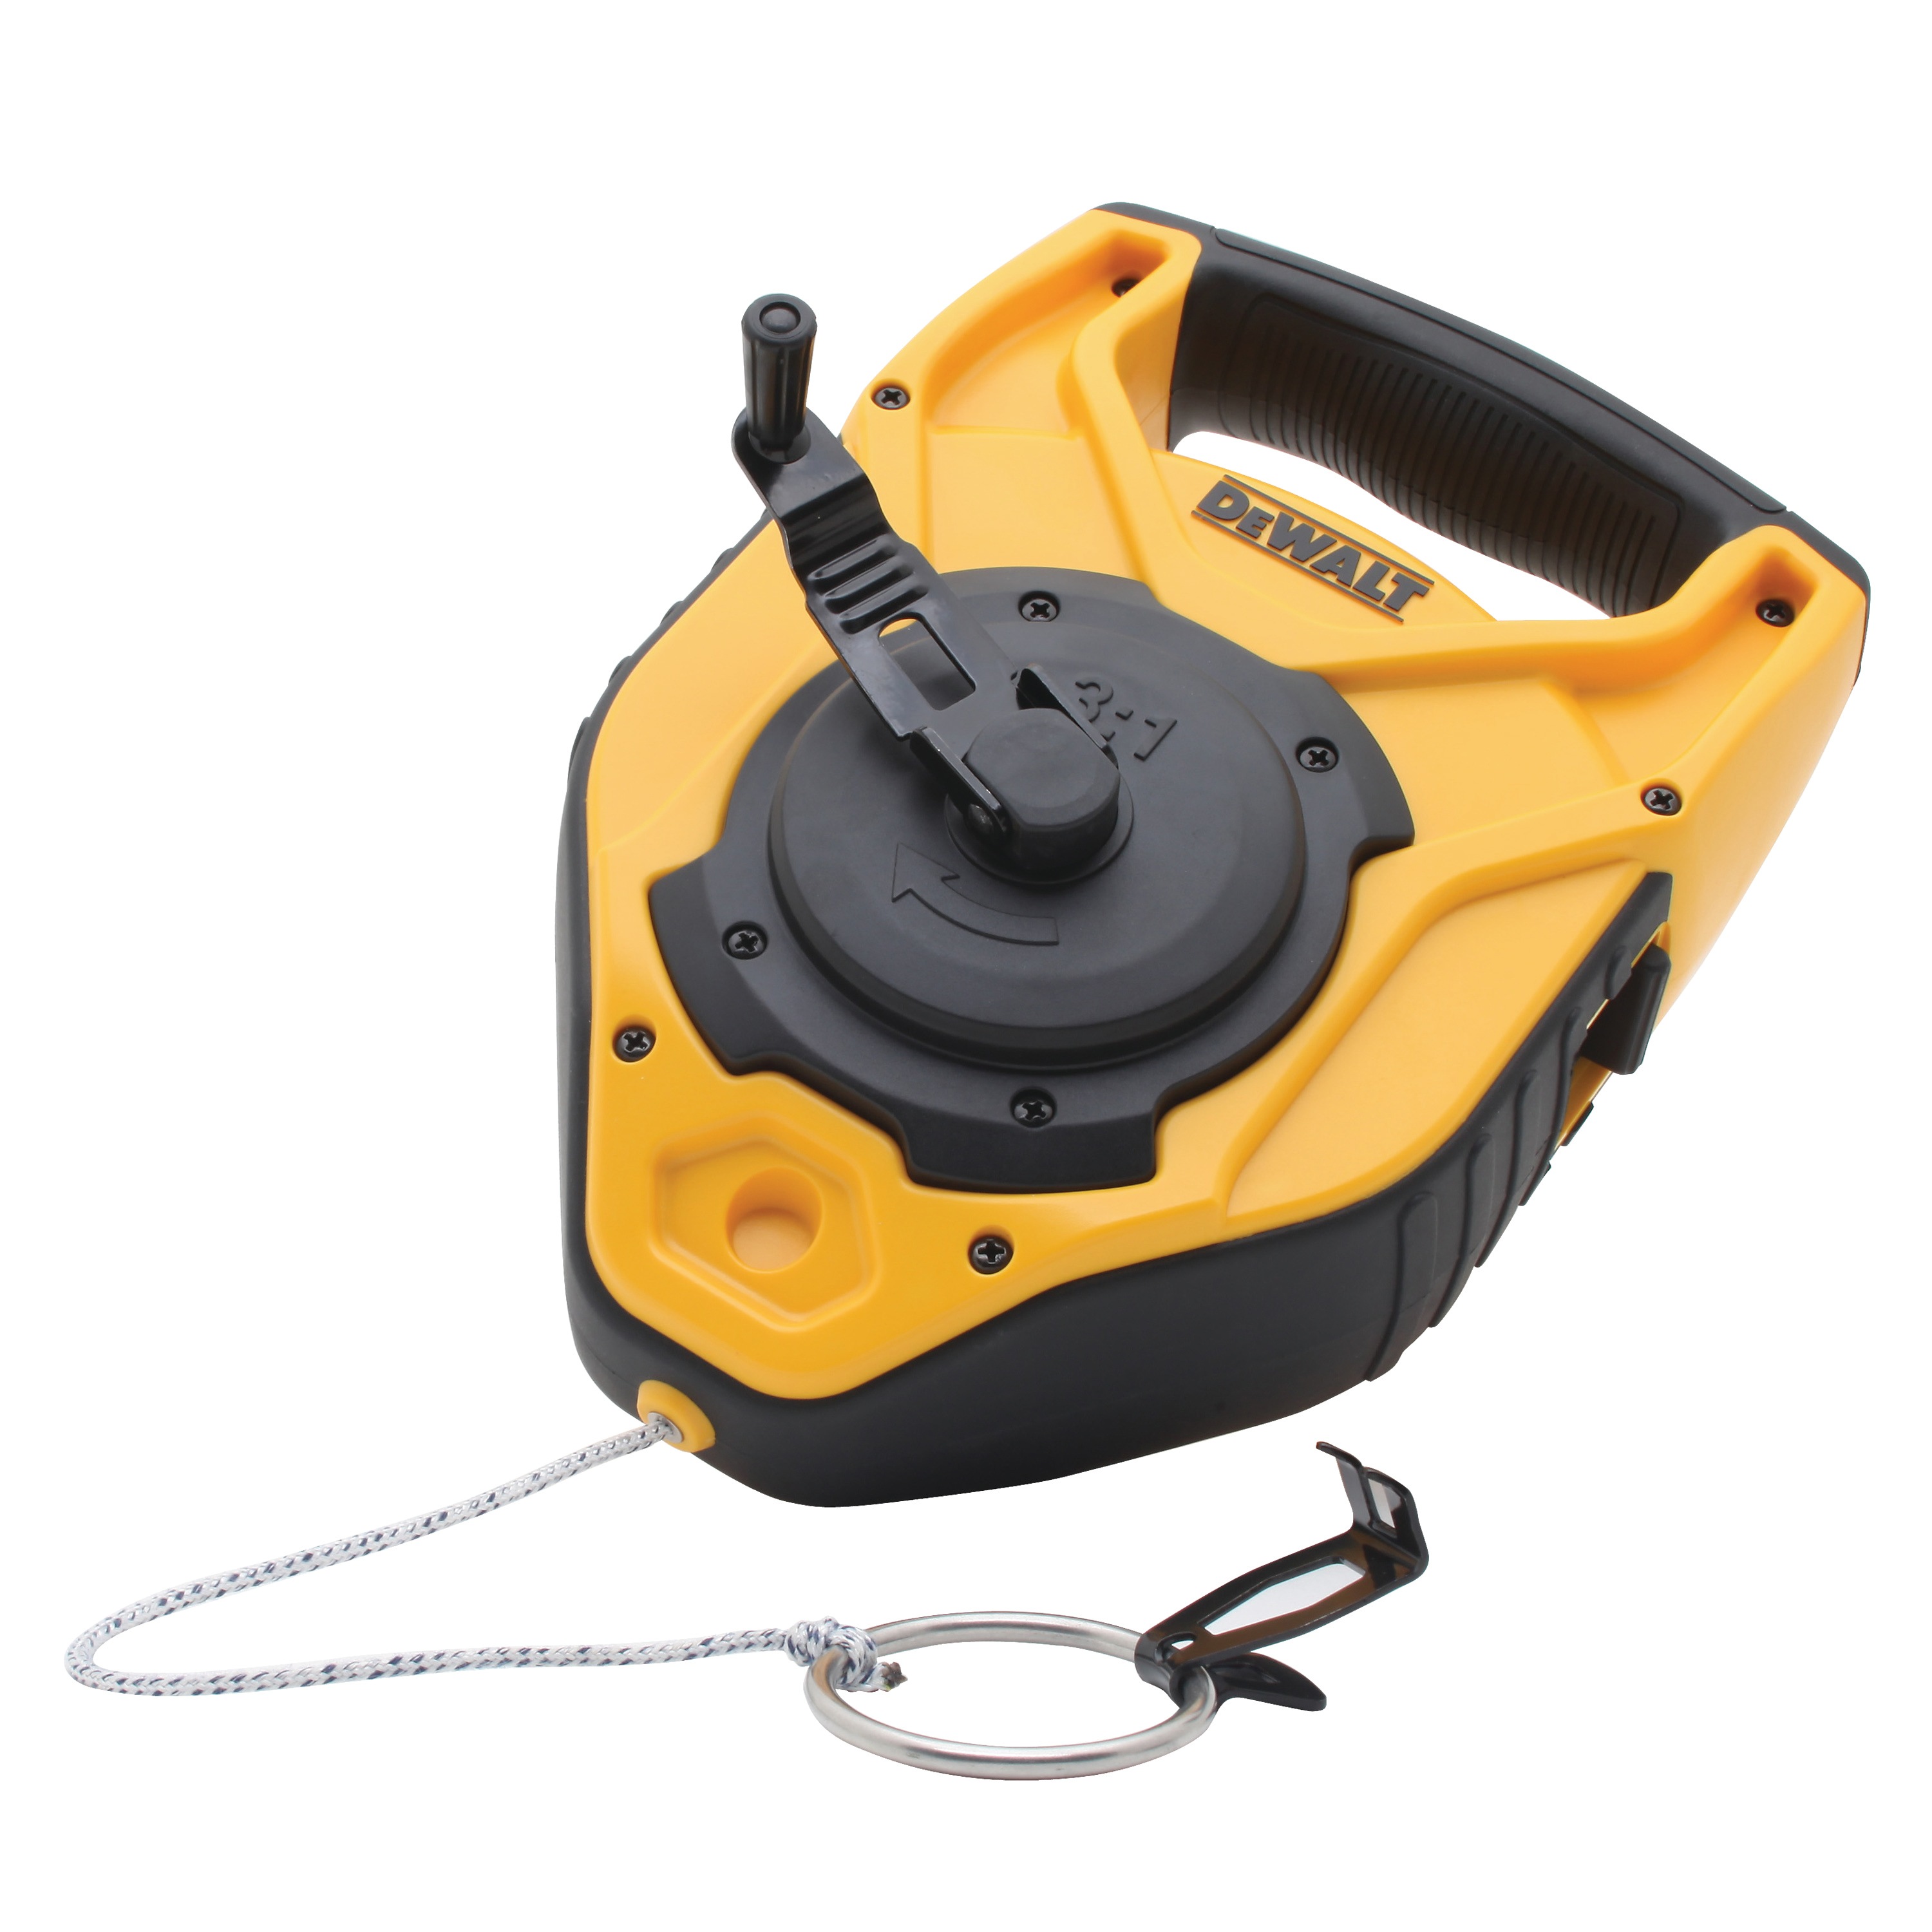 Profile of Large Capacity Chalk Reel unhooked. 